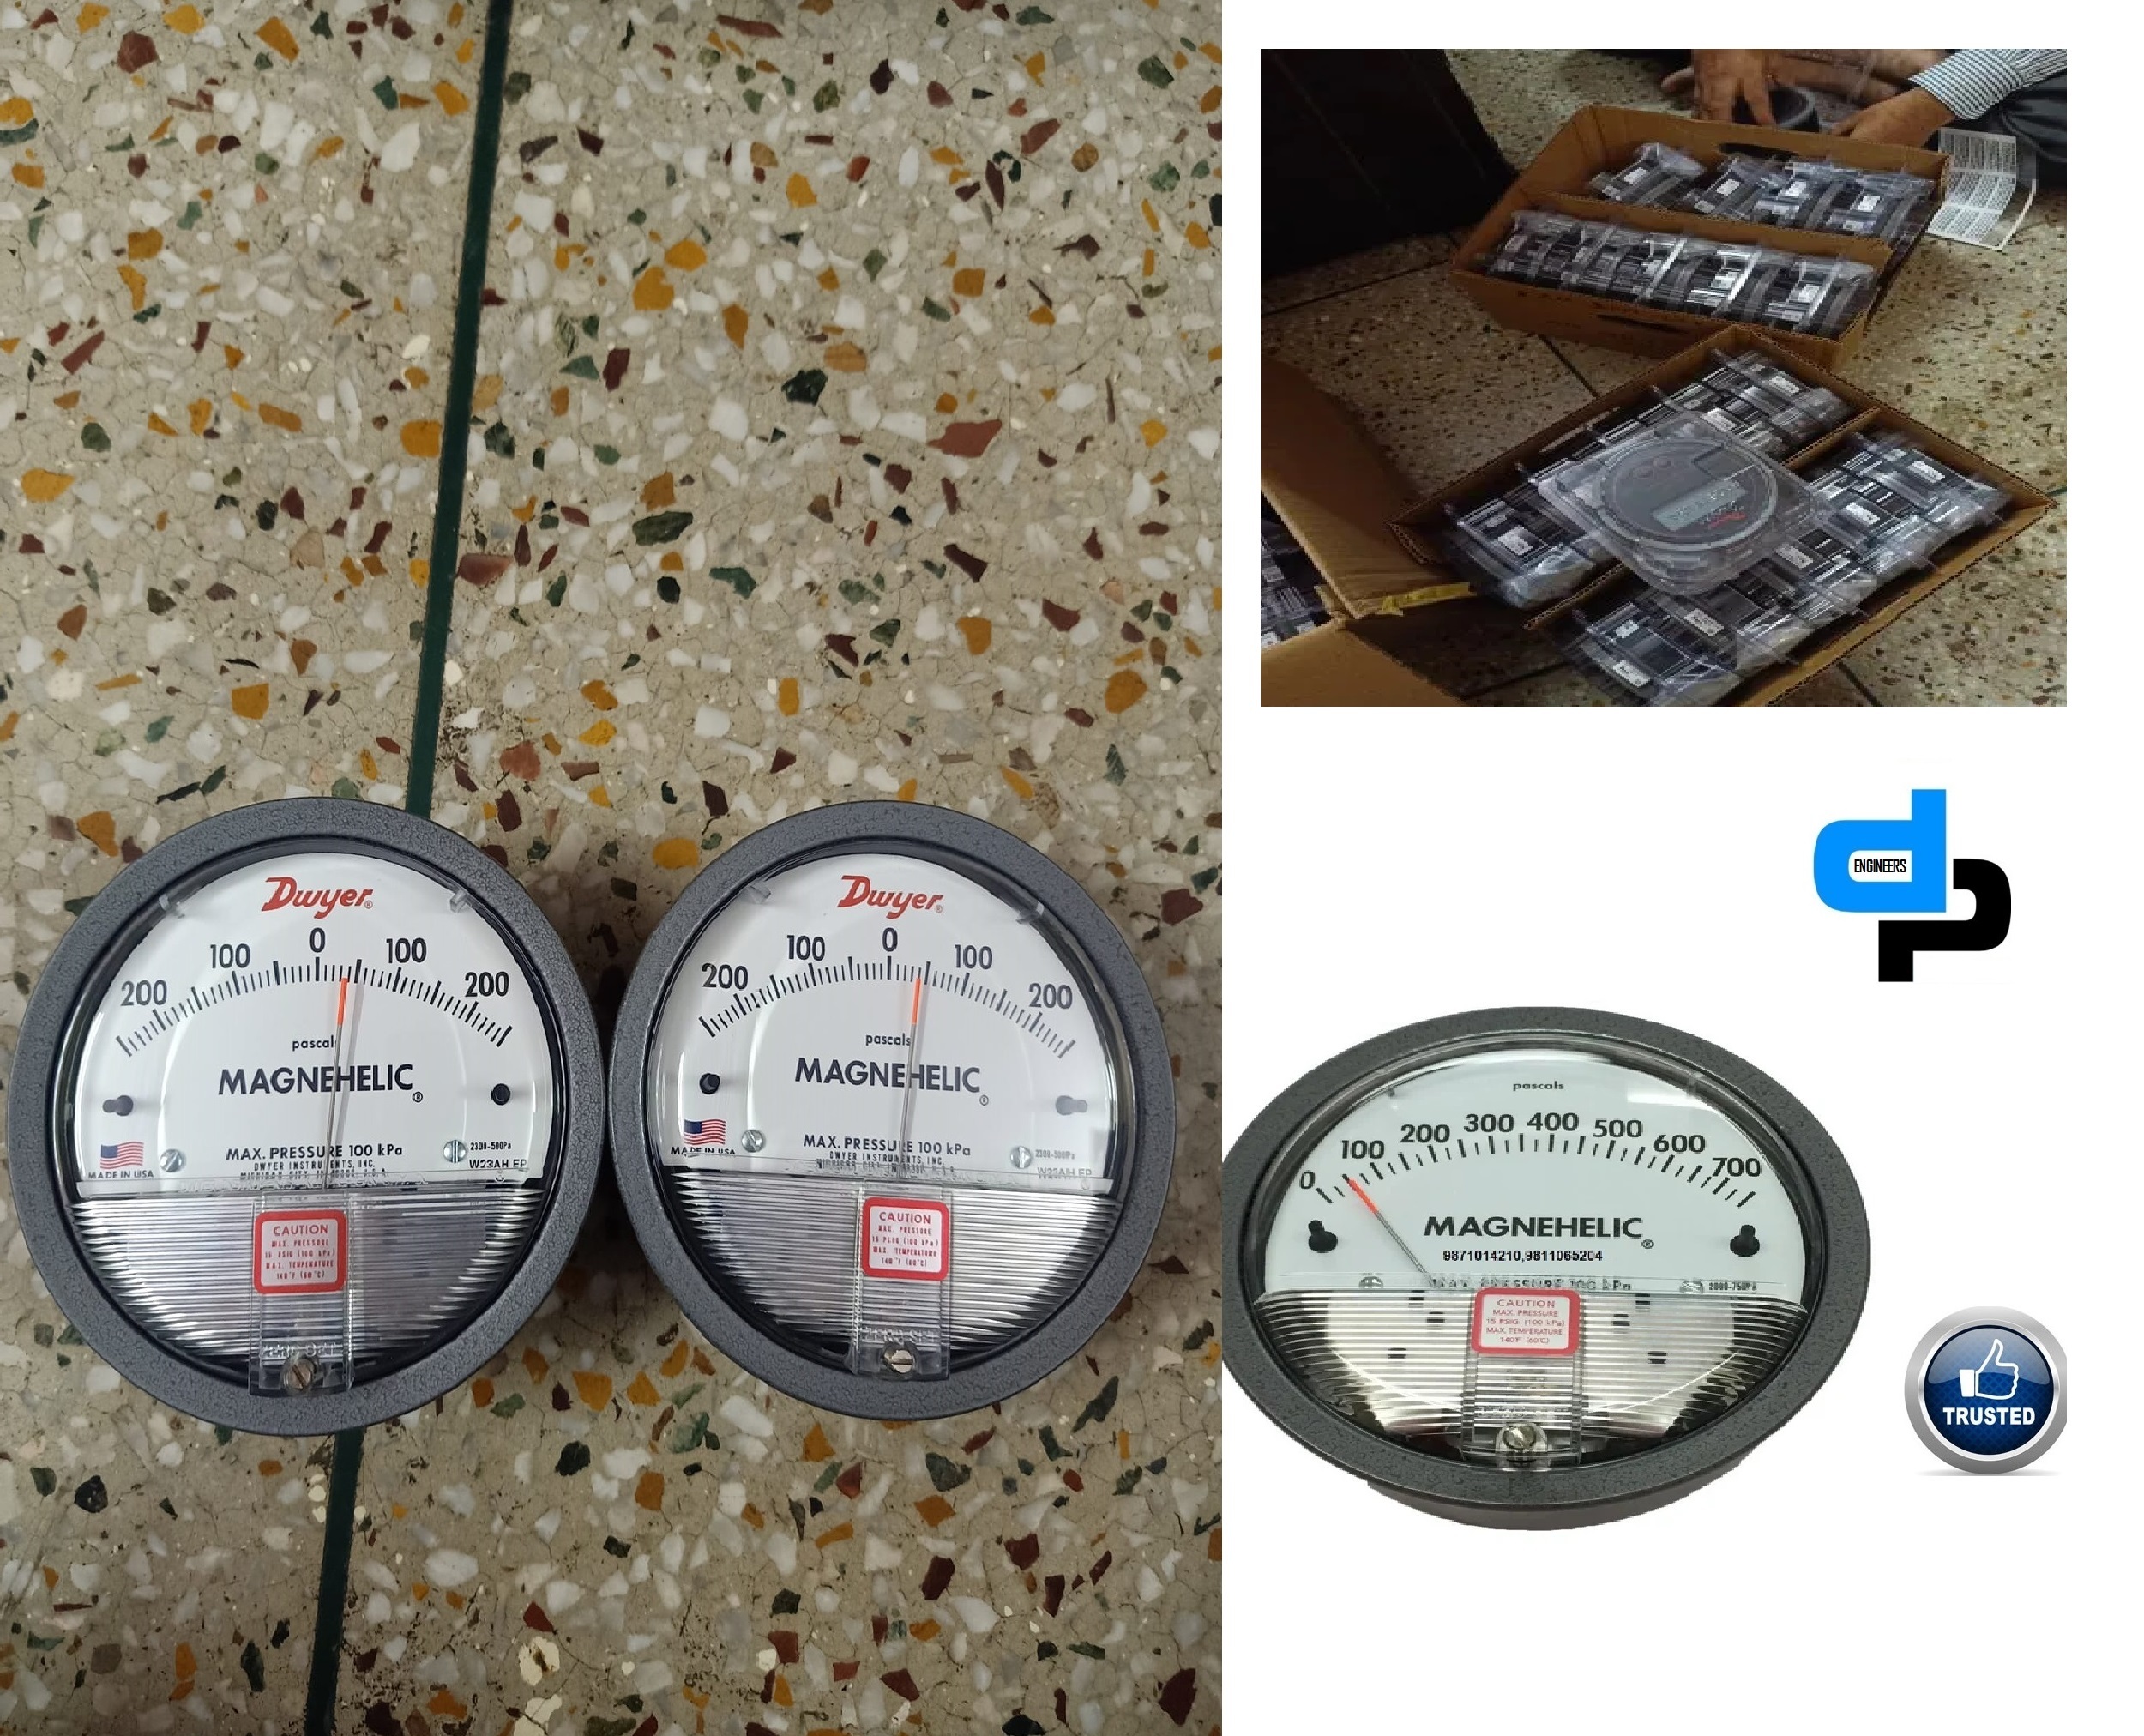 Series 2000 DWYER MAGNEHELIC Differential Pressure Gauges for Guwahati Assam